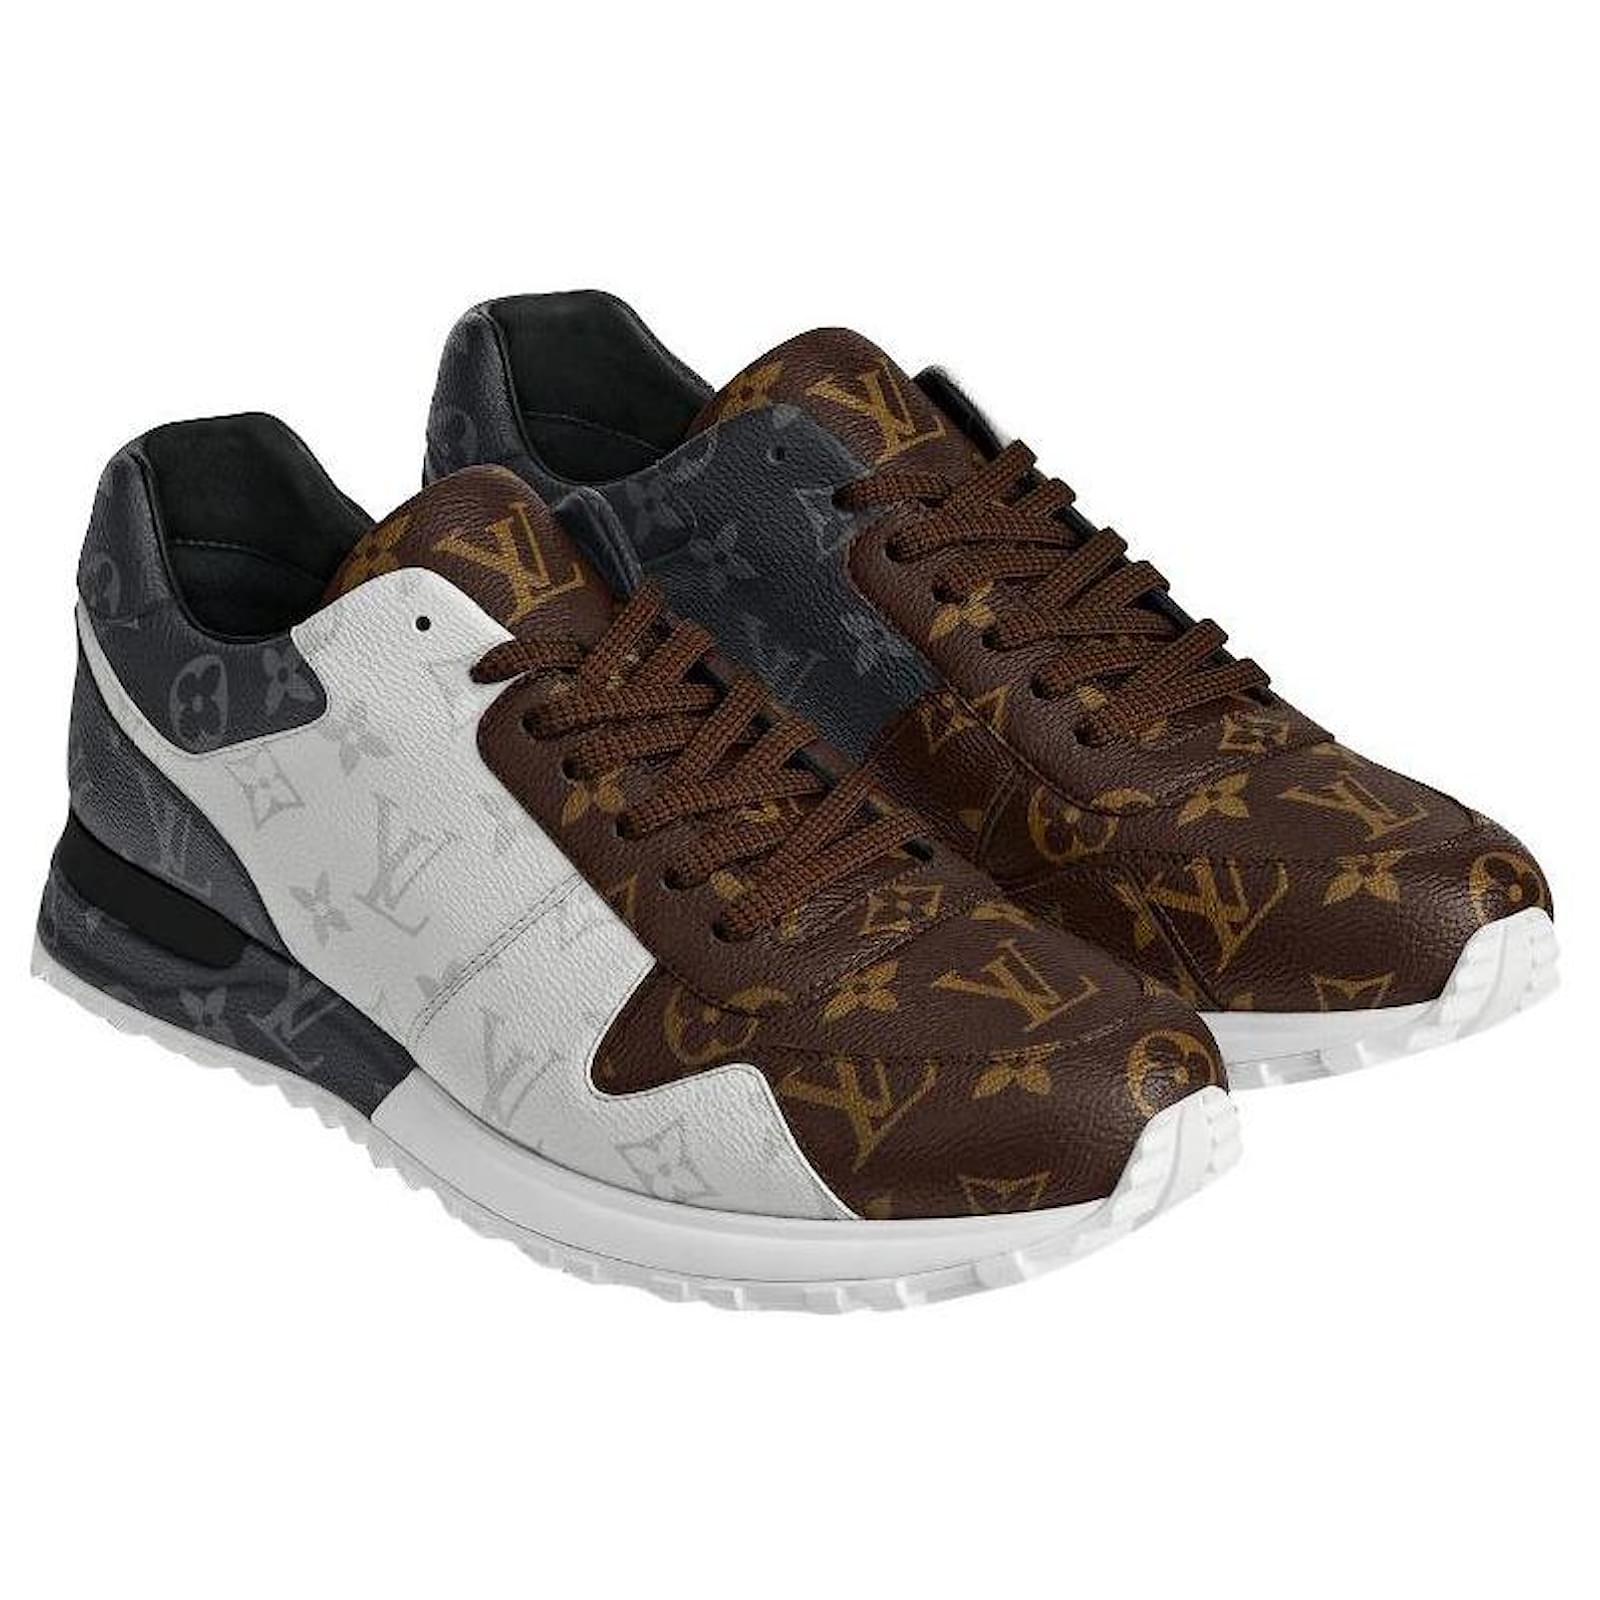 LV sneakers new